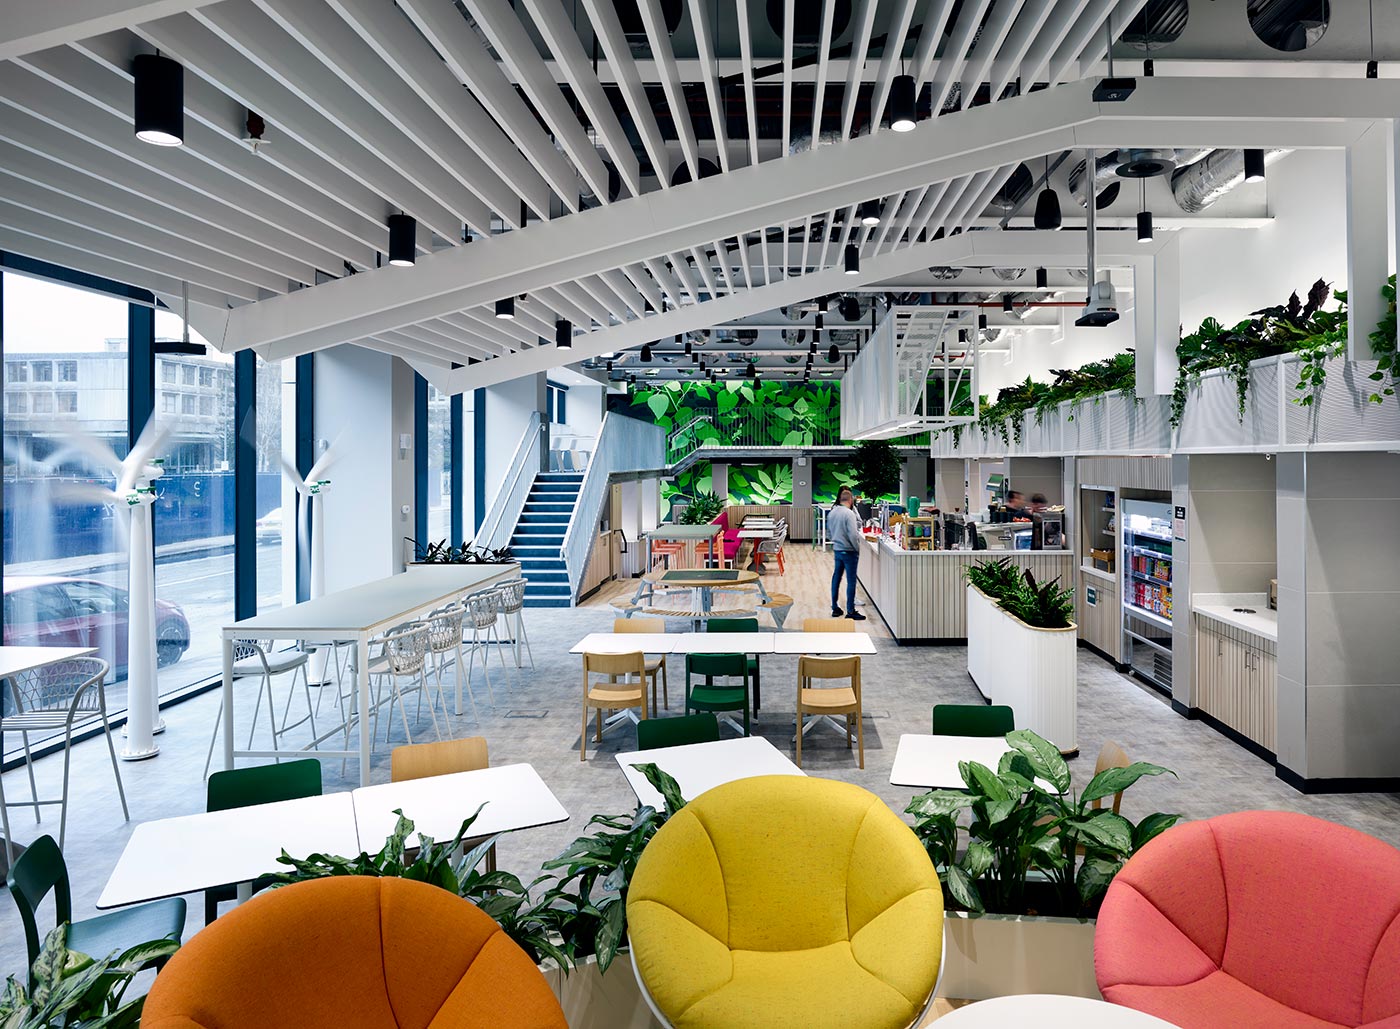 Soft seating in the foreground of an office cafe space with green leaf mural on the back wall